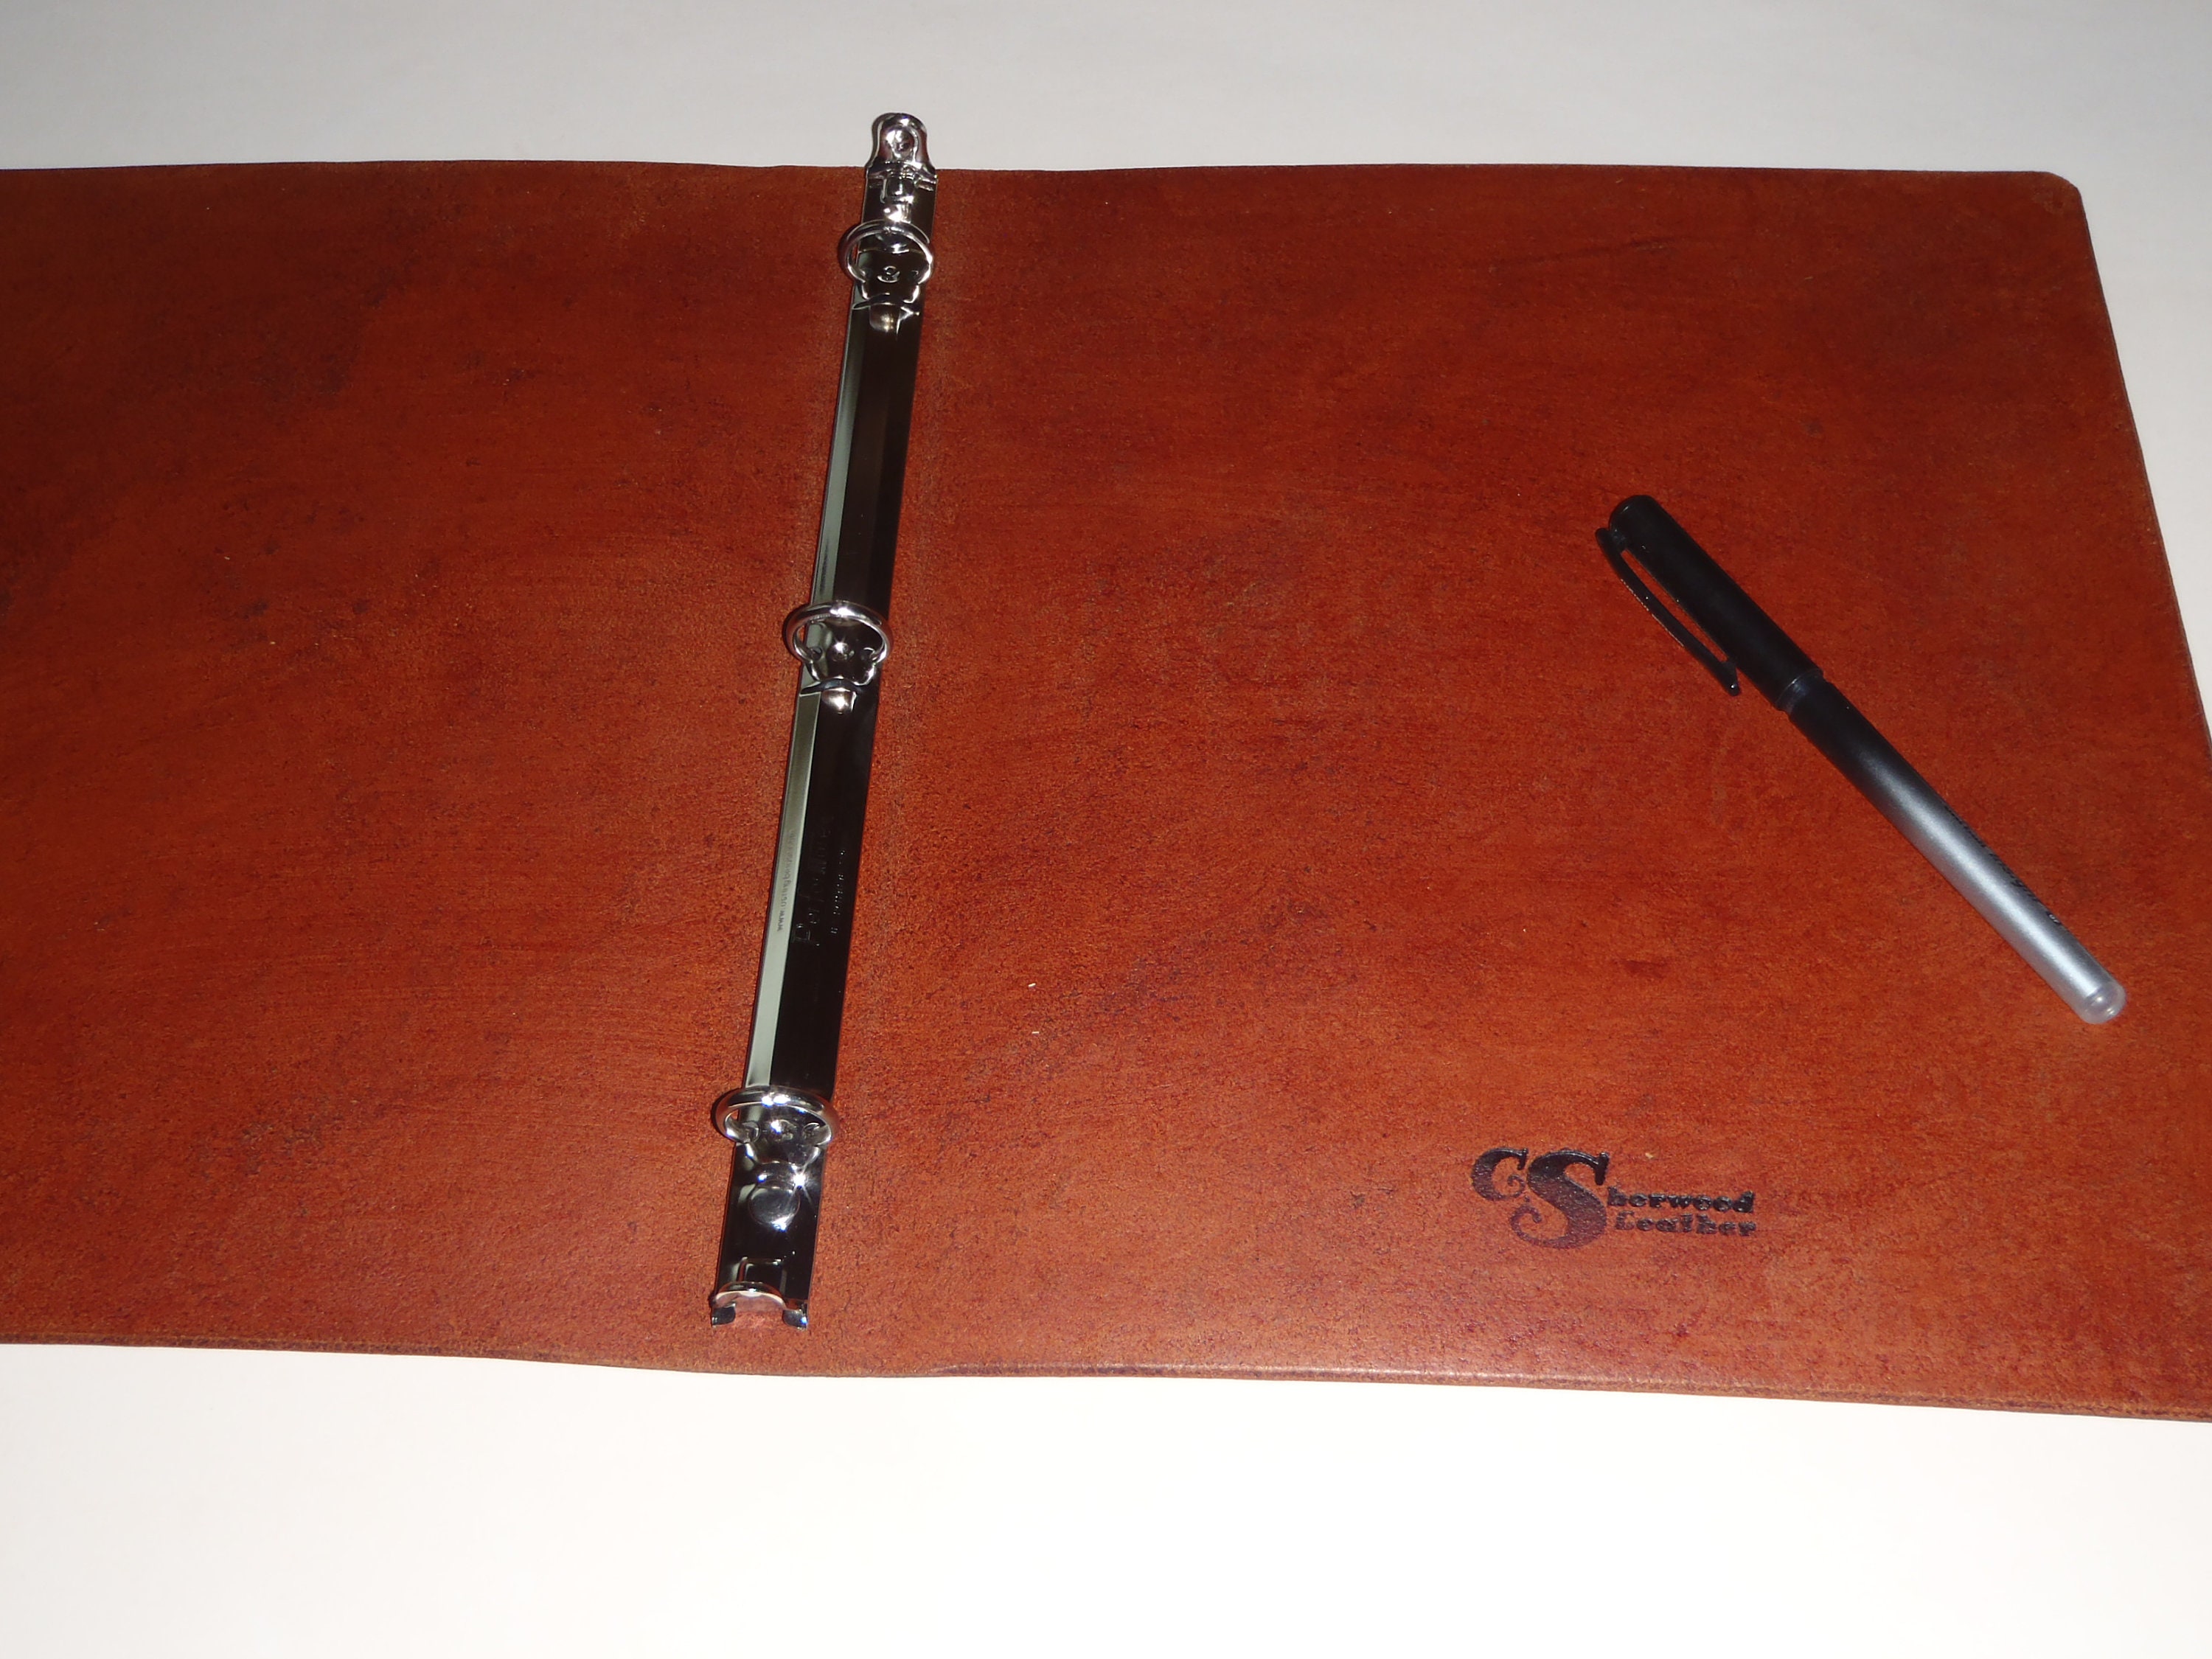 Executive Binder  Purchase an Leather Executive 3-Ring Binder at McKinley  Leather